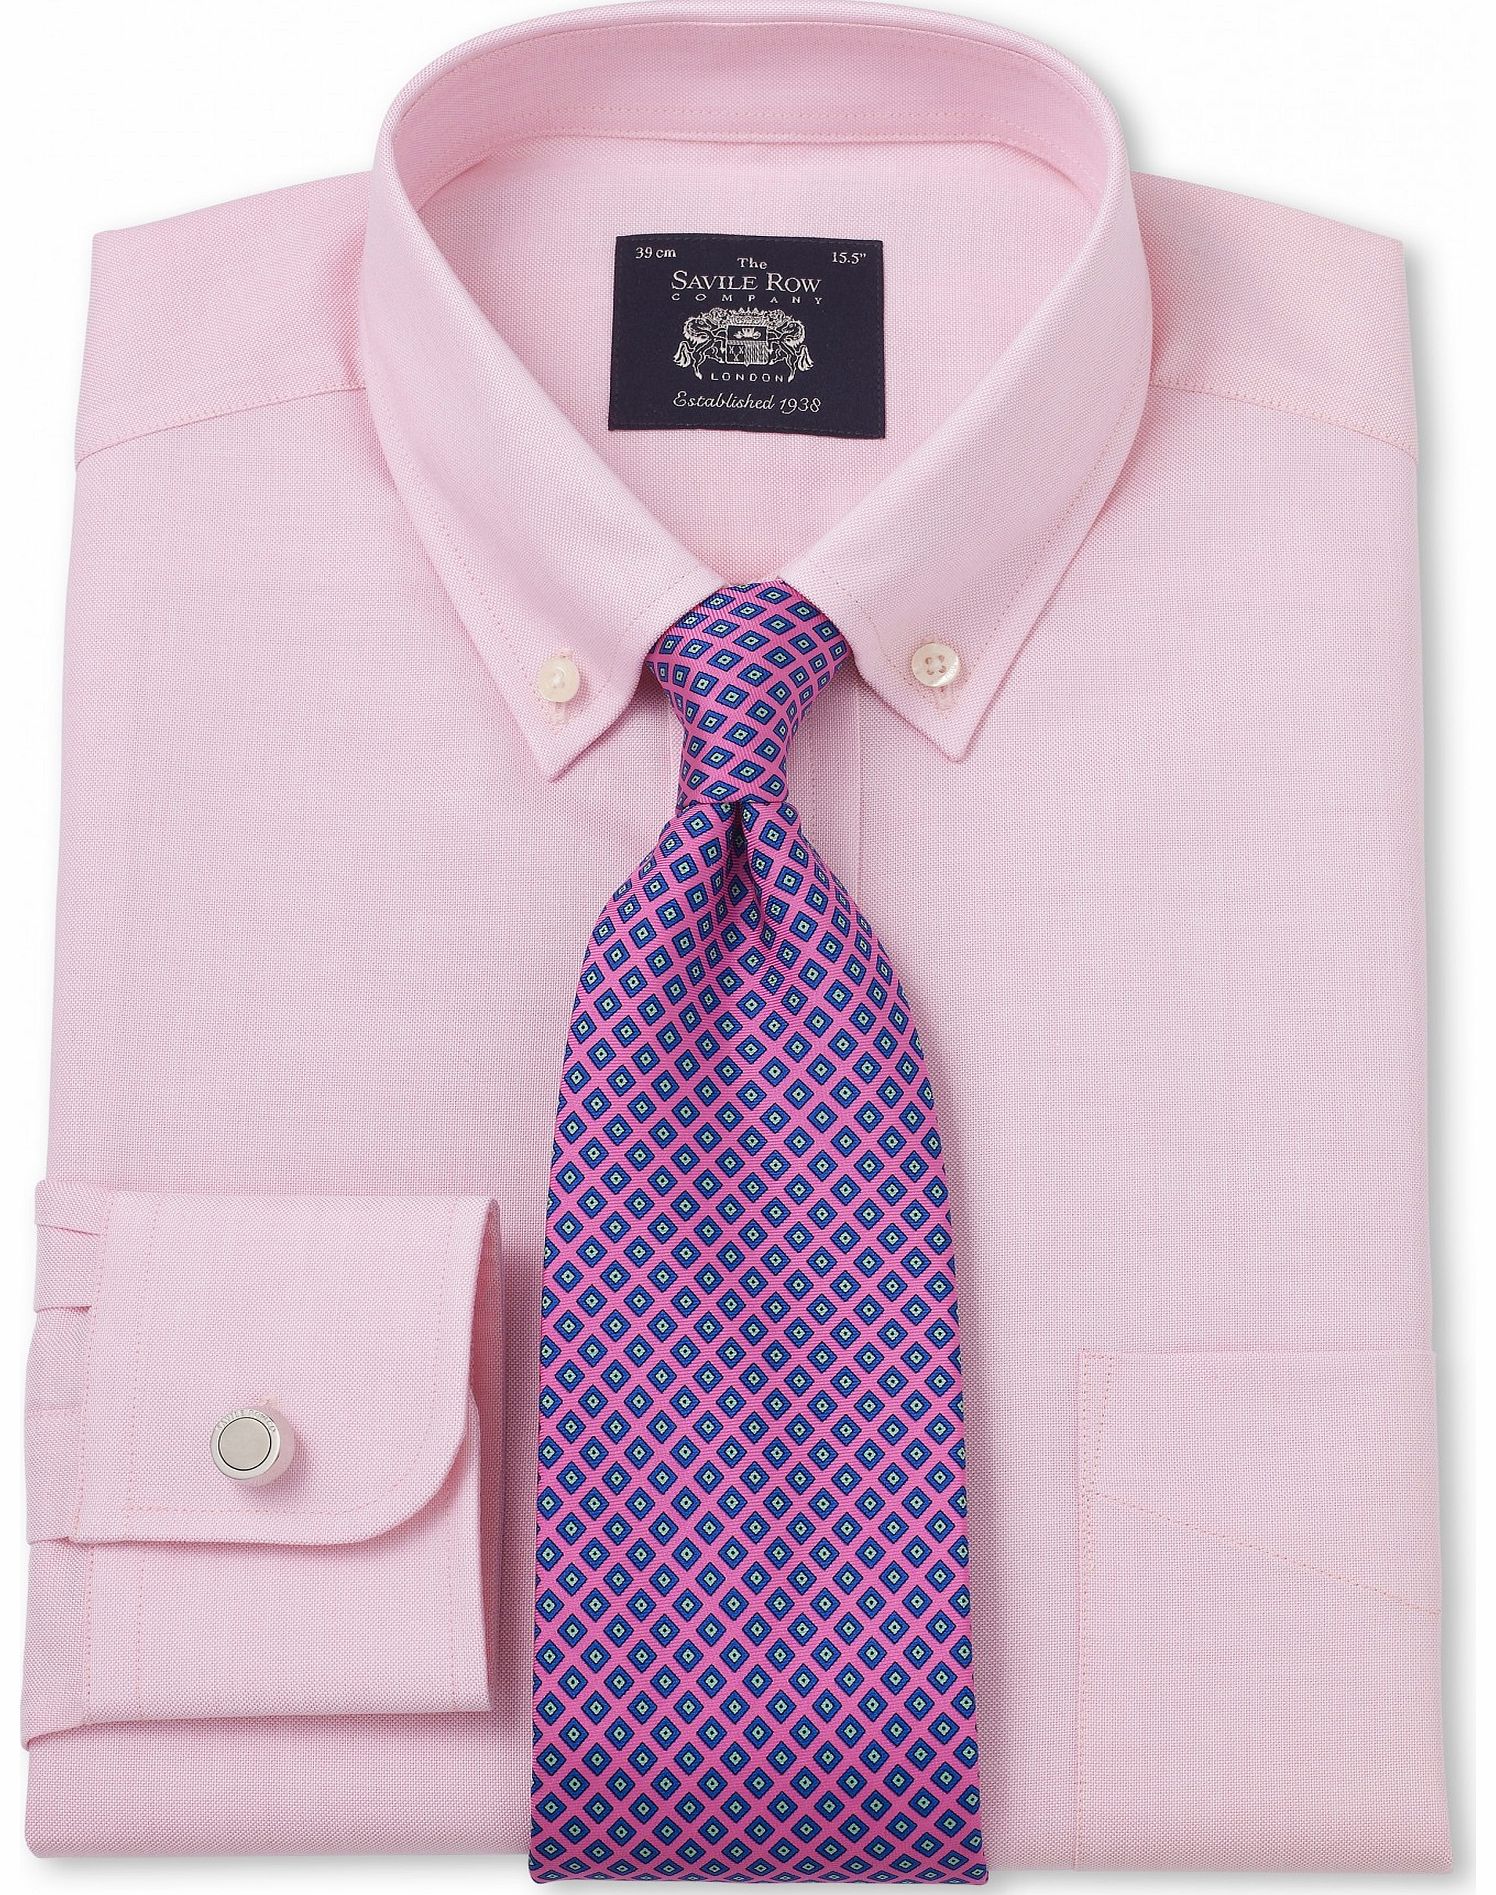 Savile Row Company Pink Pinpoint Classic Fit Shirt 15`` Lengthened